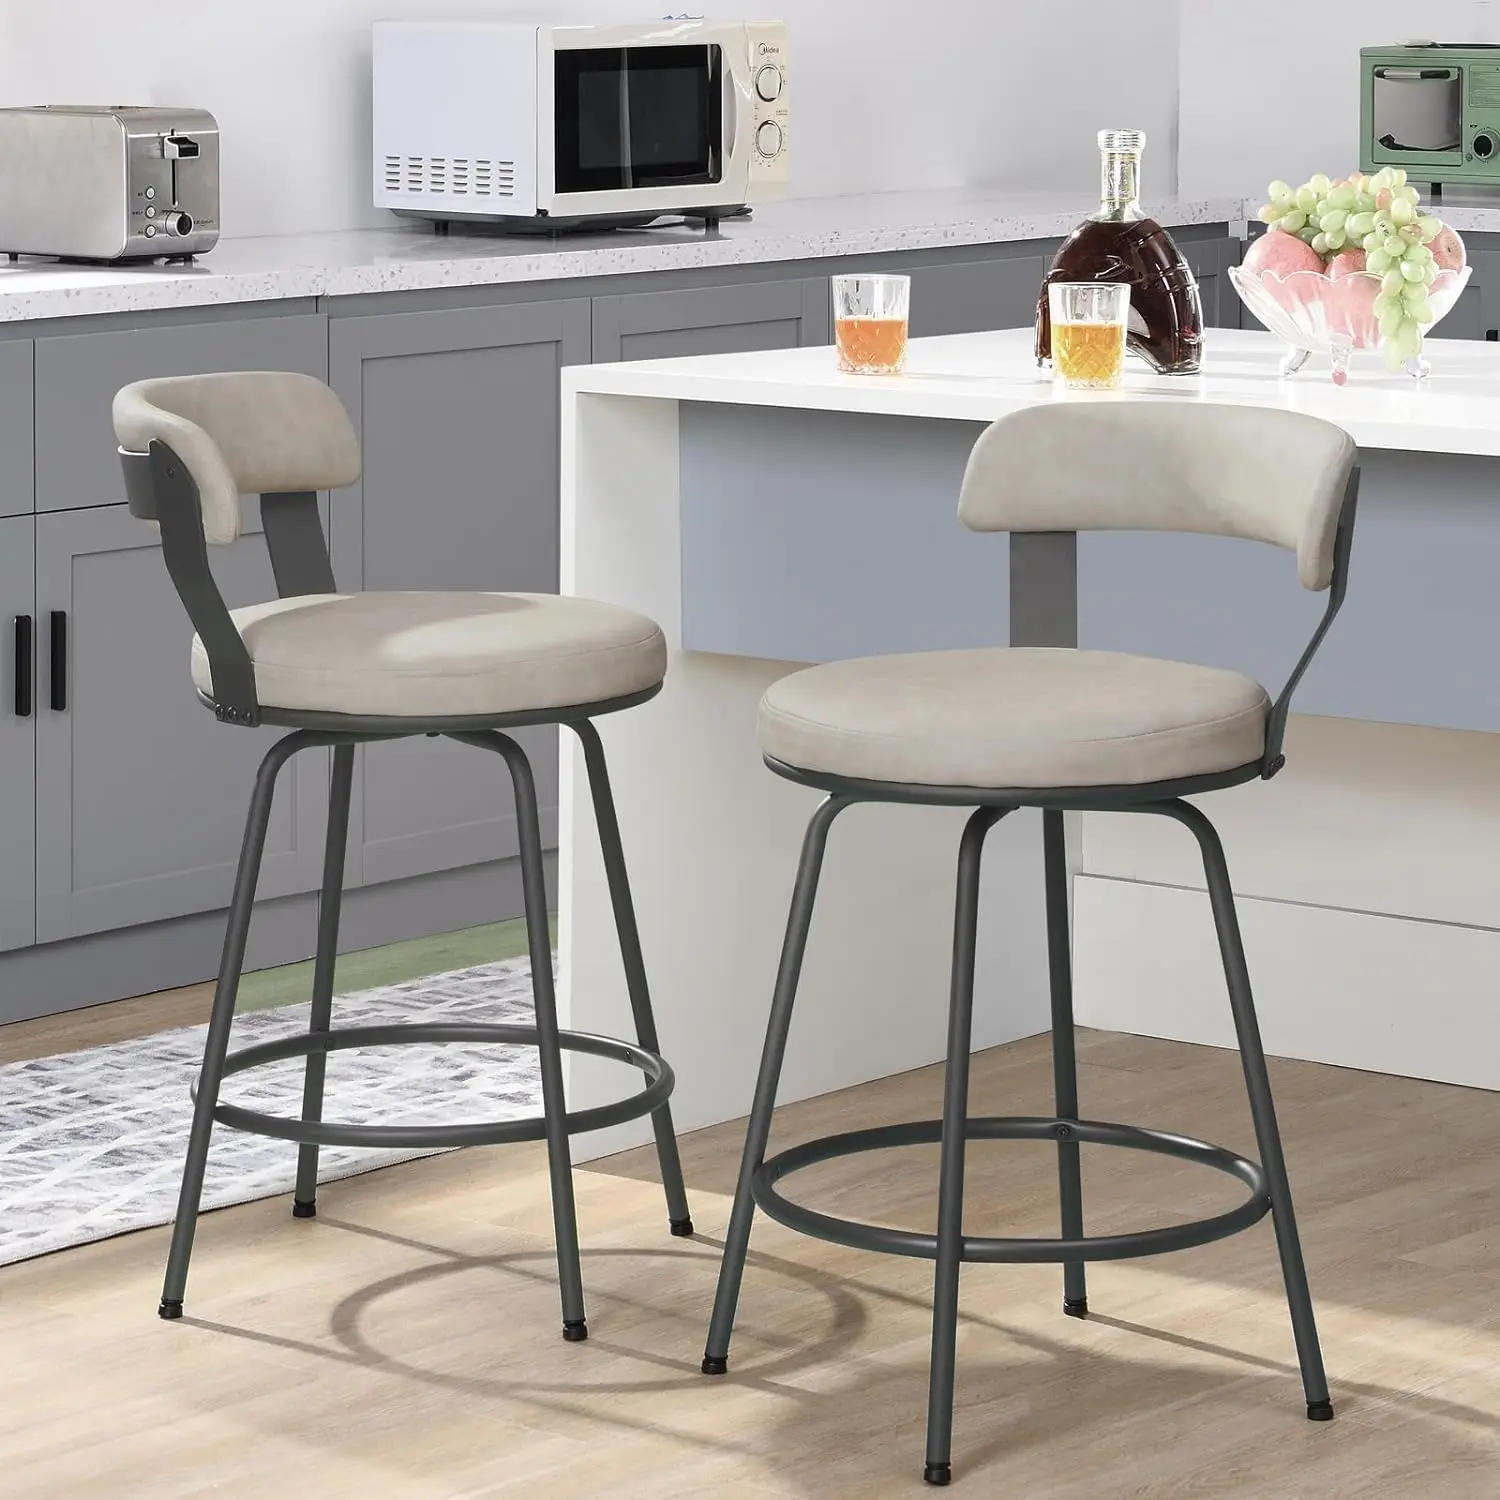 

Bar Stools Set of 2-Metal Stools for Kitchen Counter PU Leather Barstools Swivel Bar Chairs for Dining Cafe